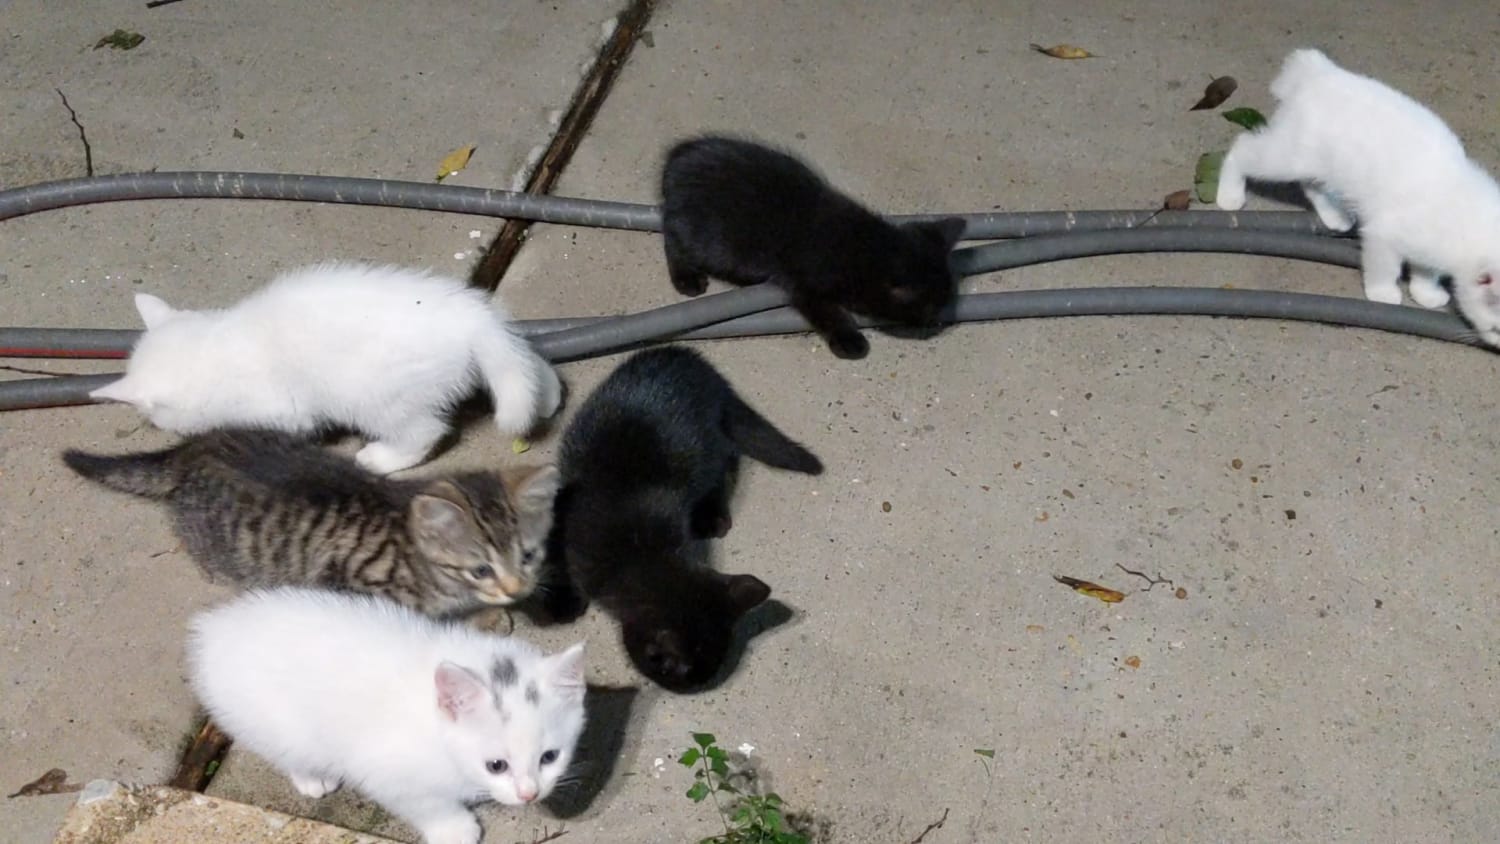 A random group of stray cats came to my house! https://youtu.be/cjtPf7tys_4